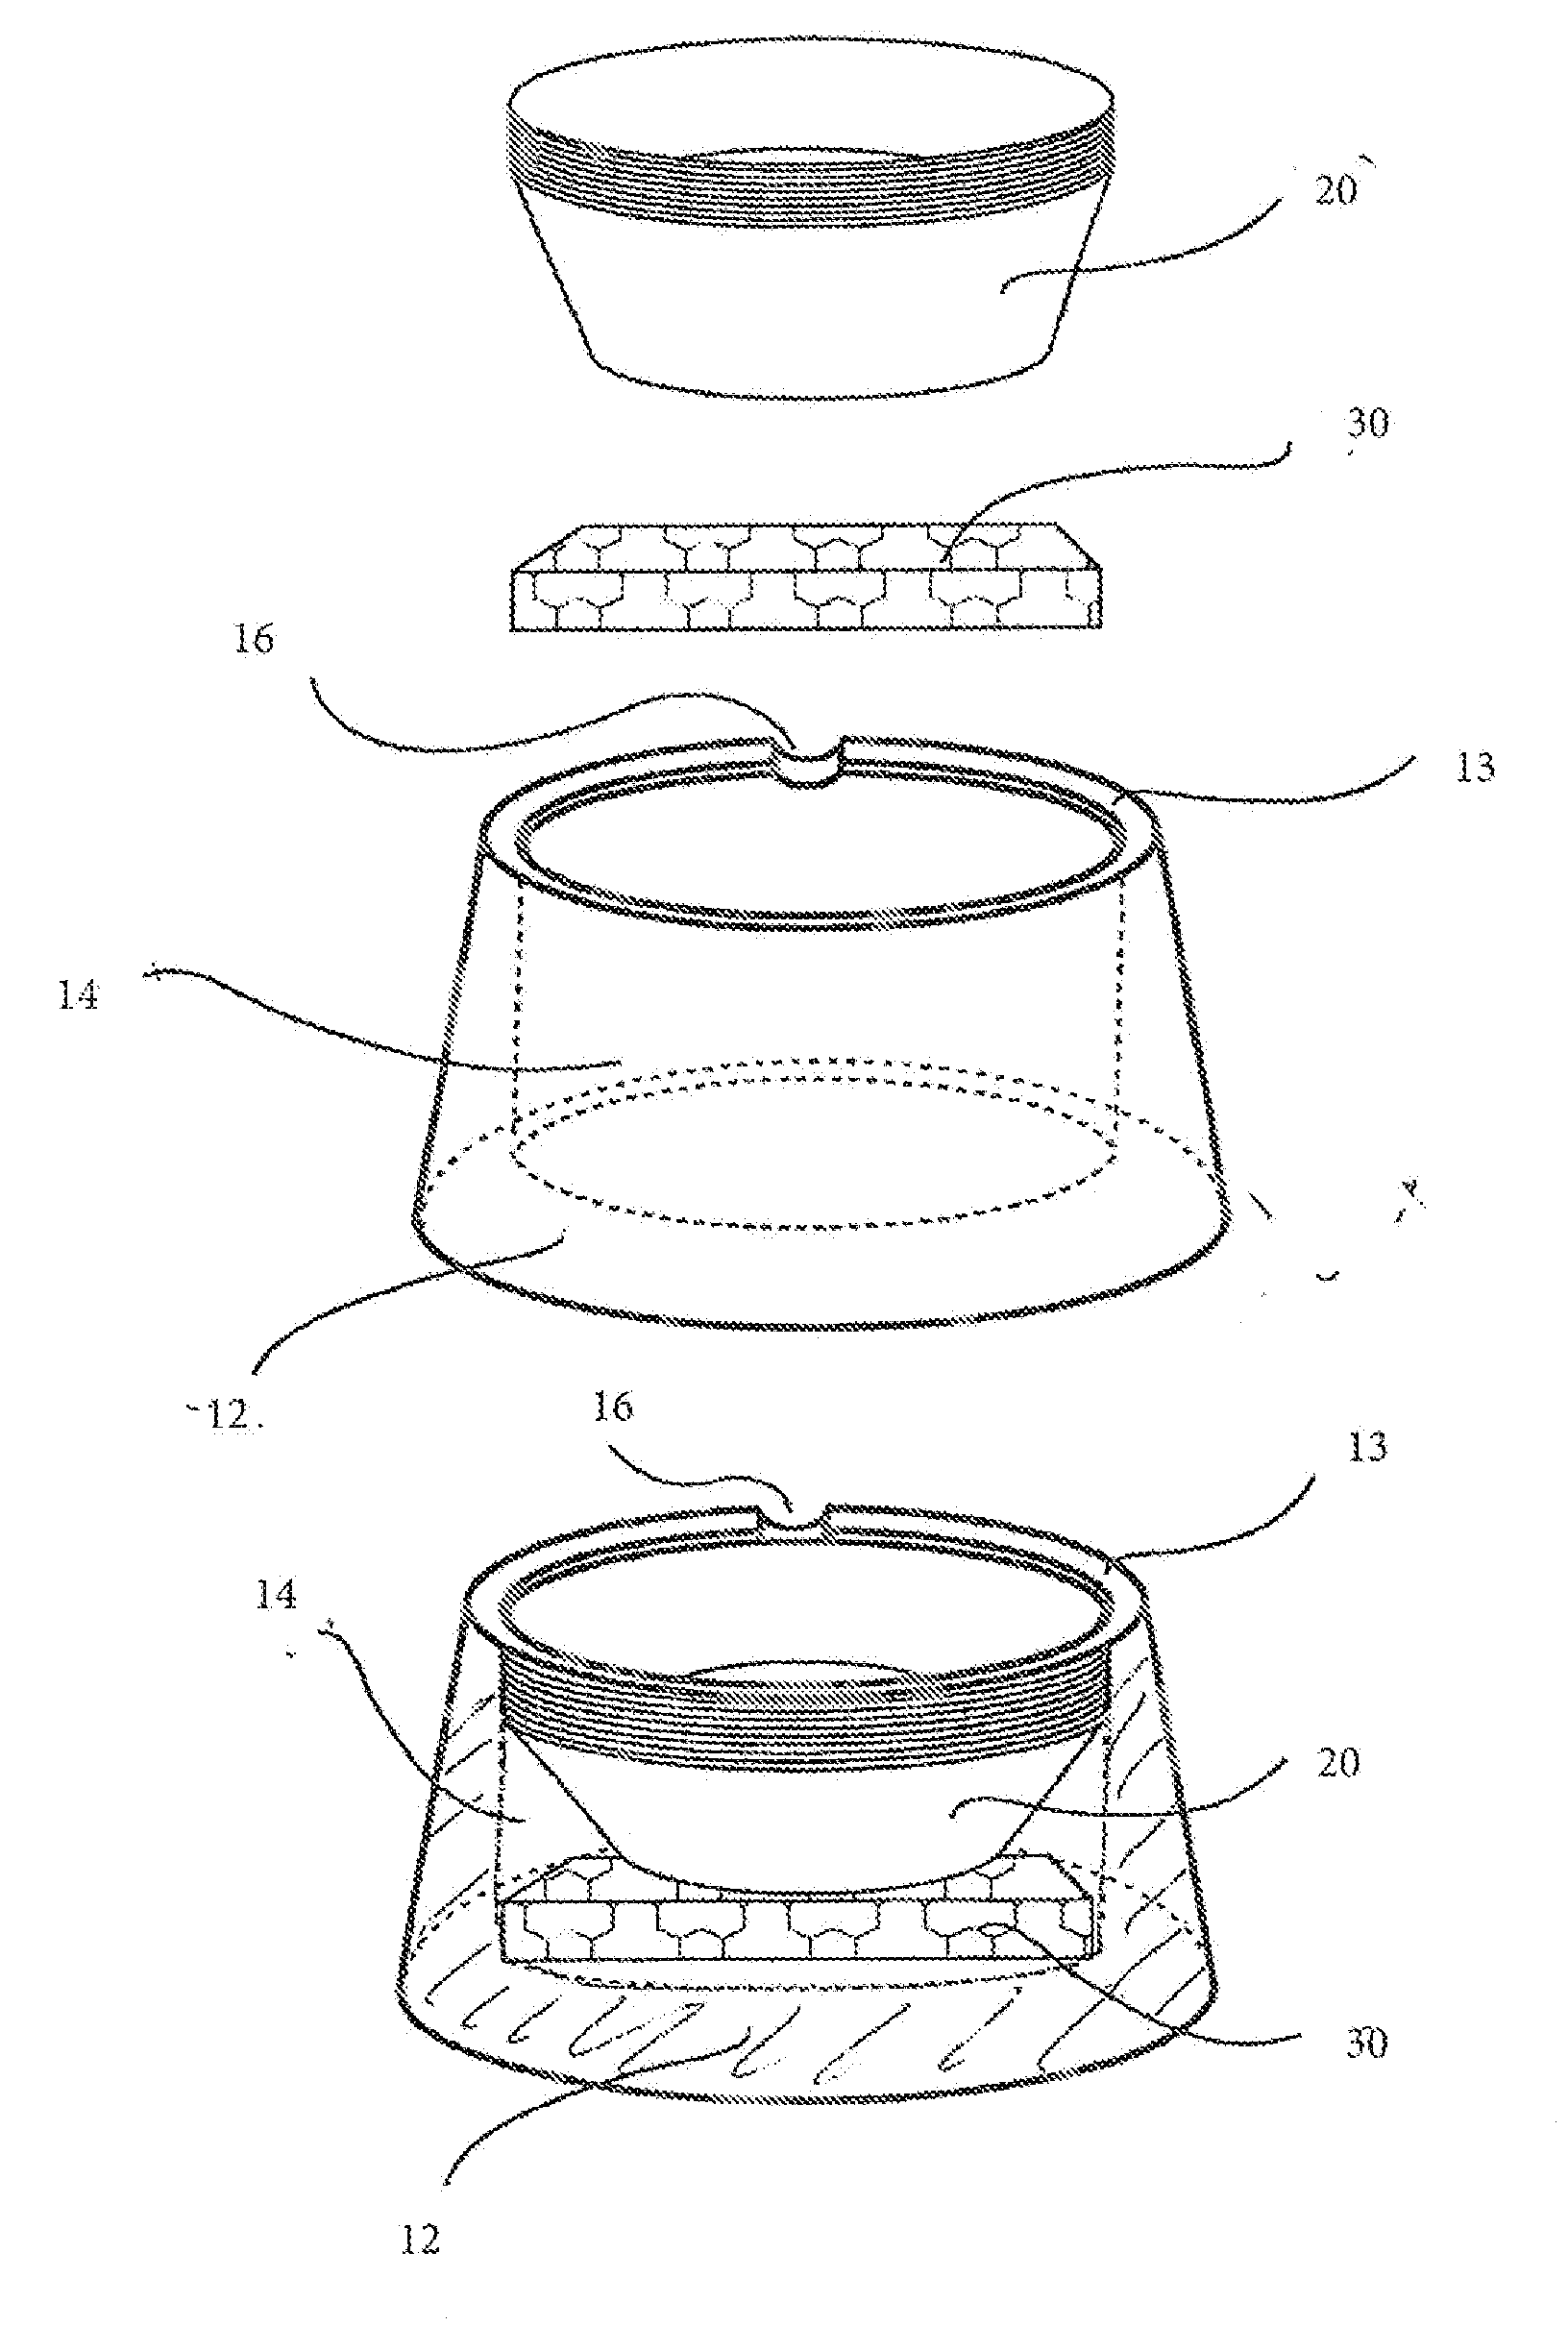 Combination Storage, Dispensing and Feeding Device for Domestic Animals